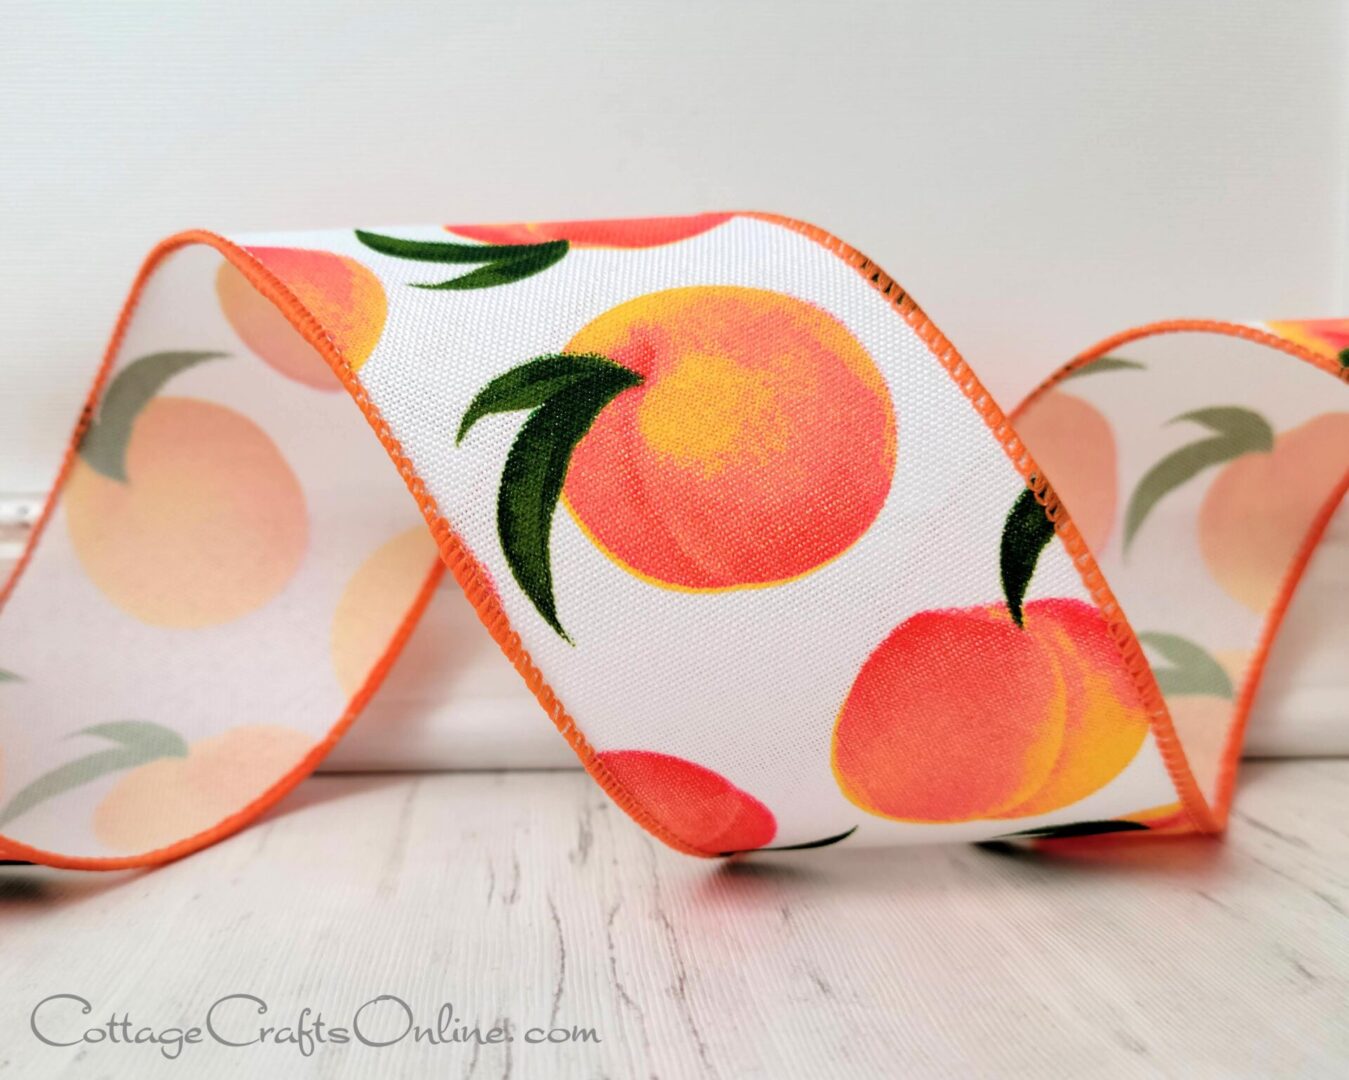 A close up of a ribbon with oranges on it